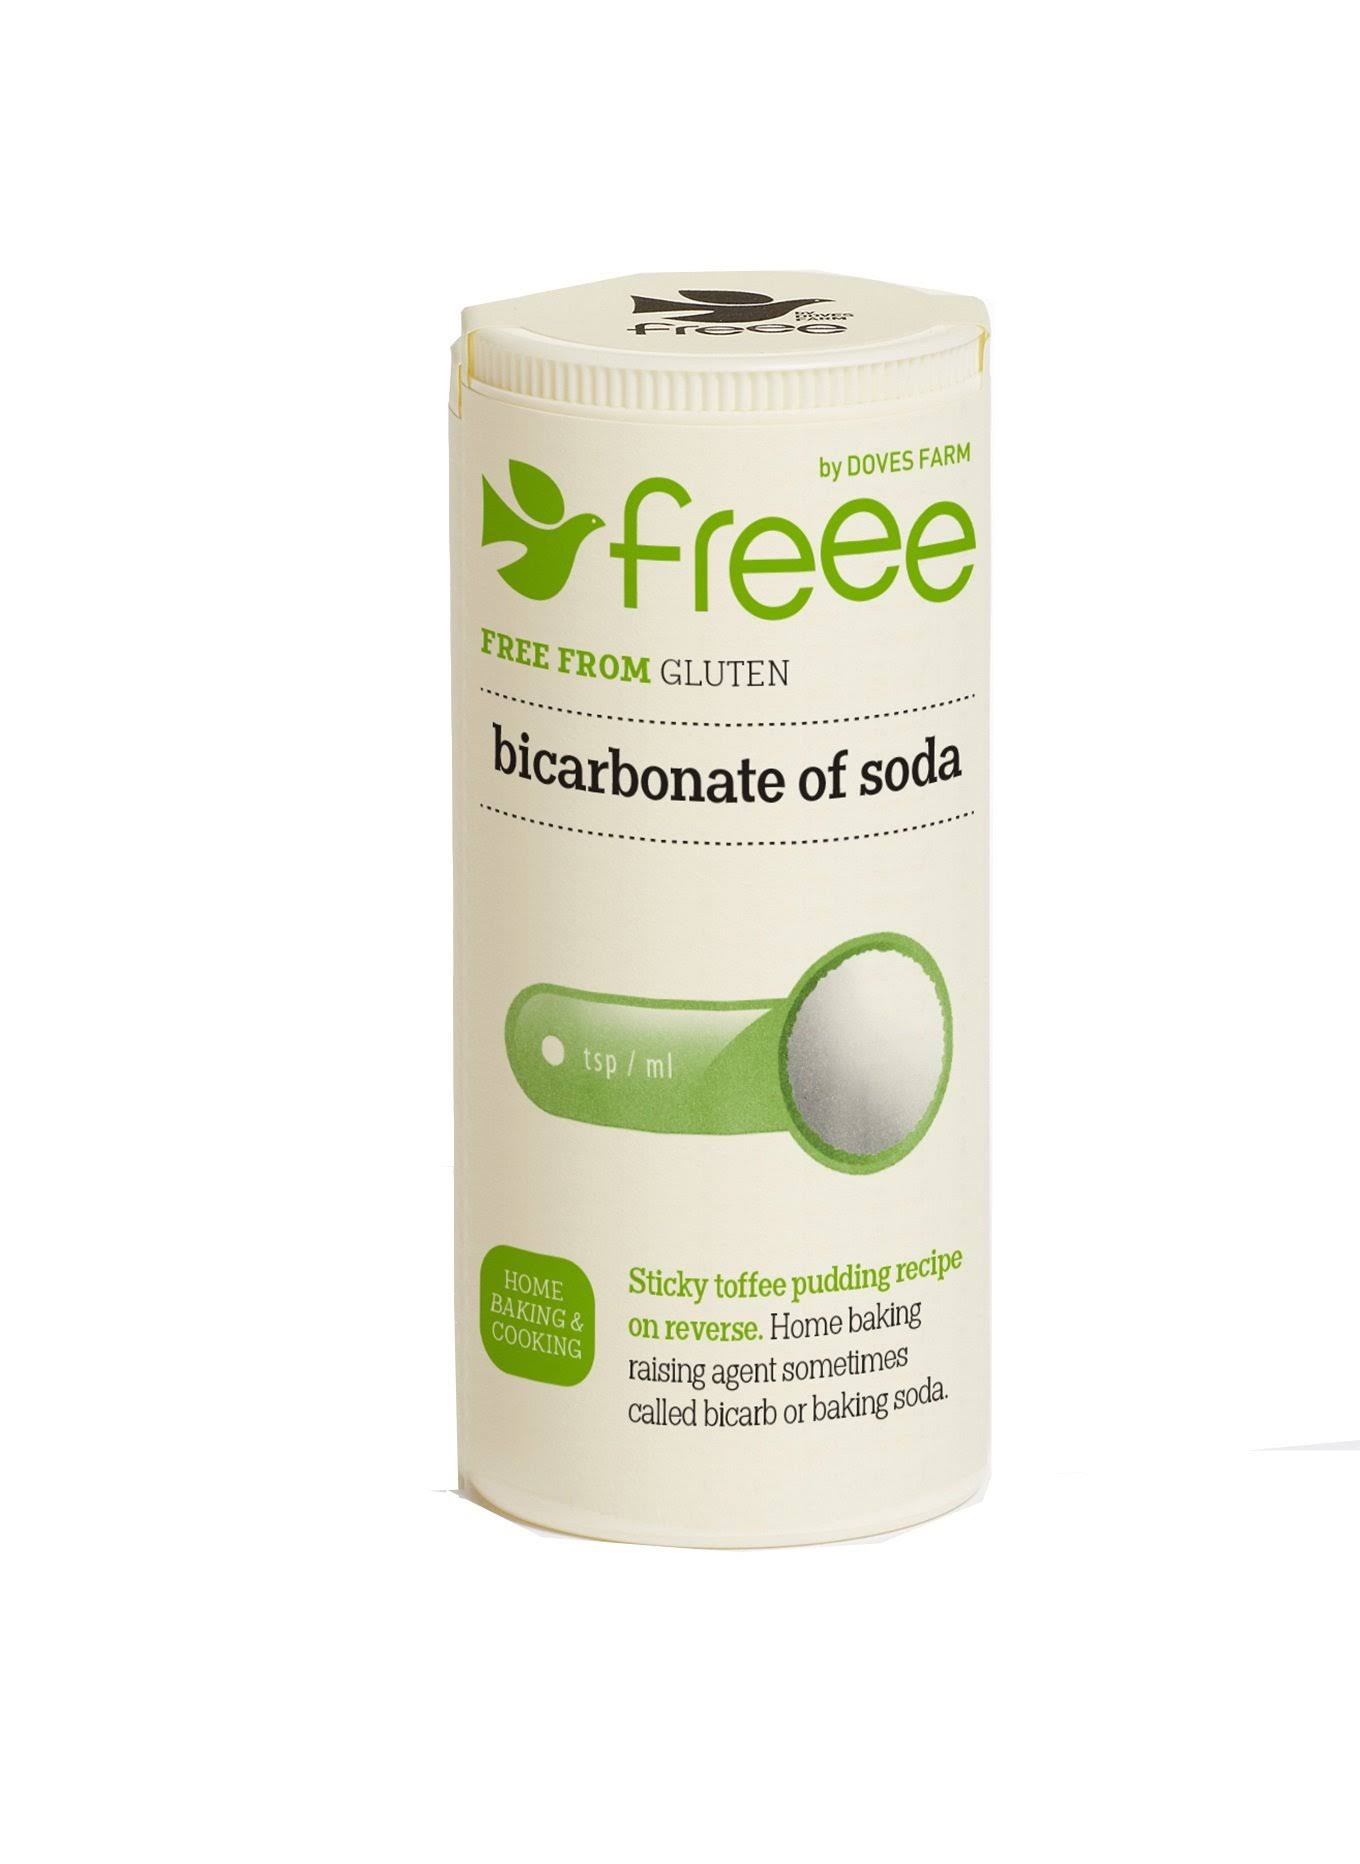 Freee by Doves Farm Bicarbonate of Soda - 200g